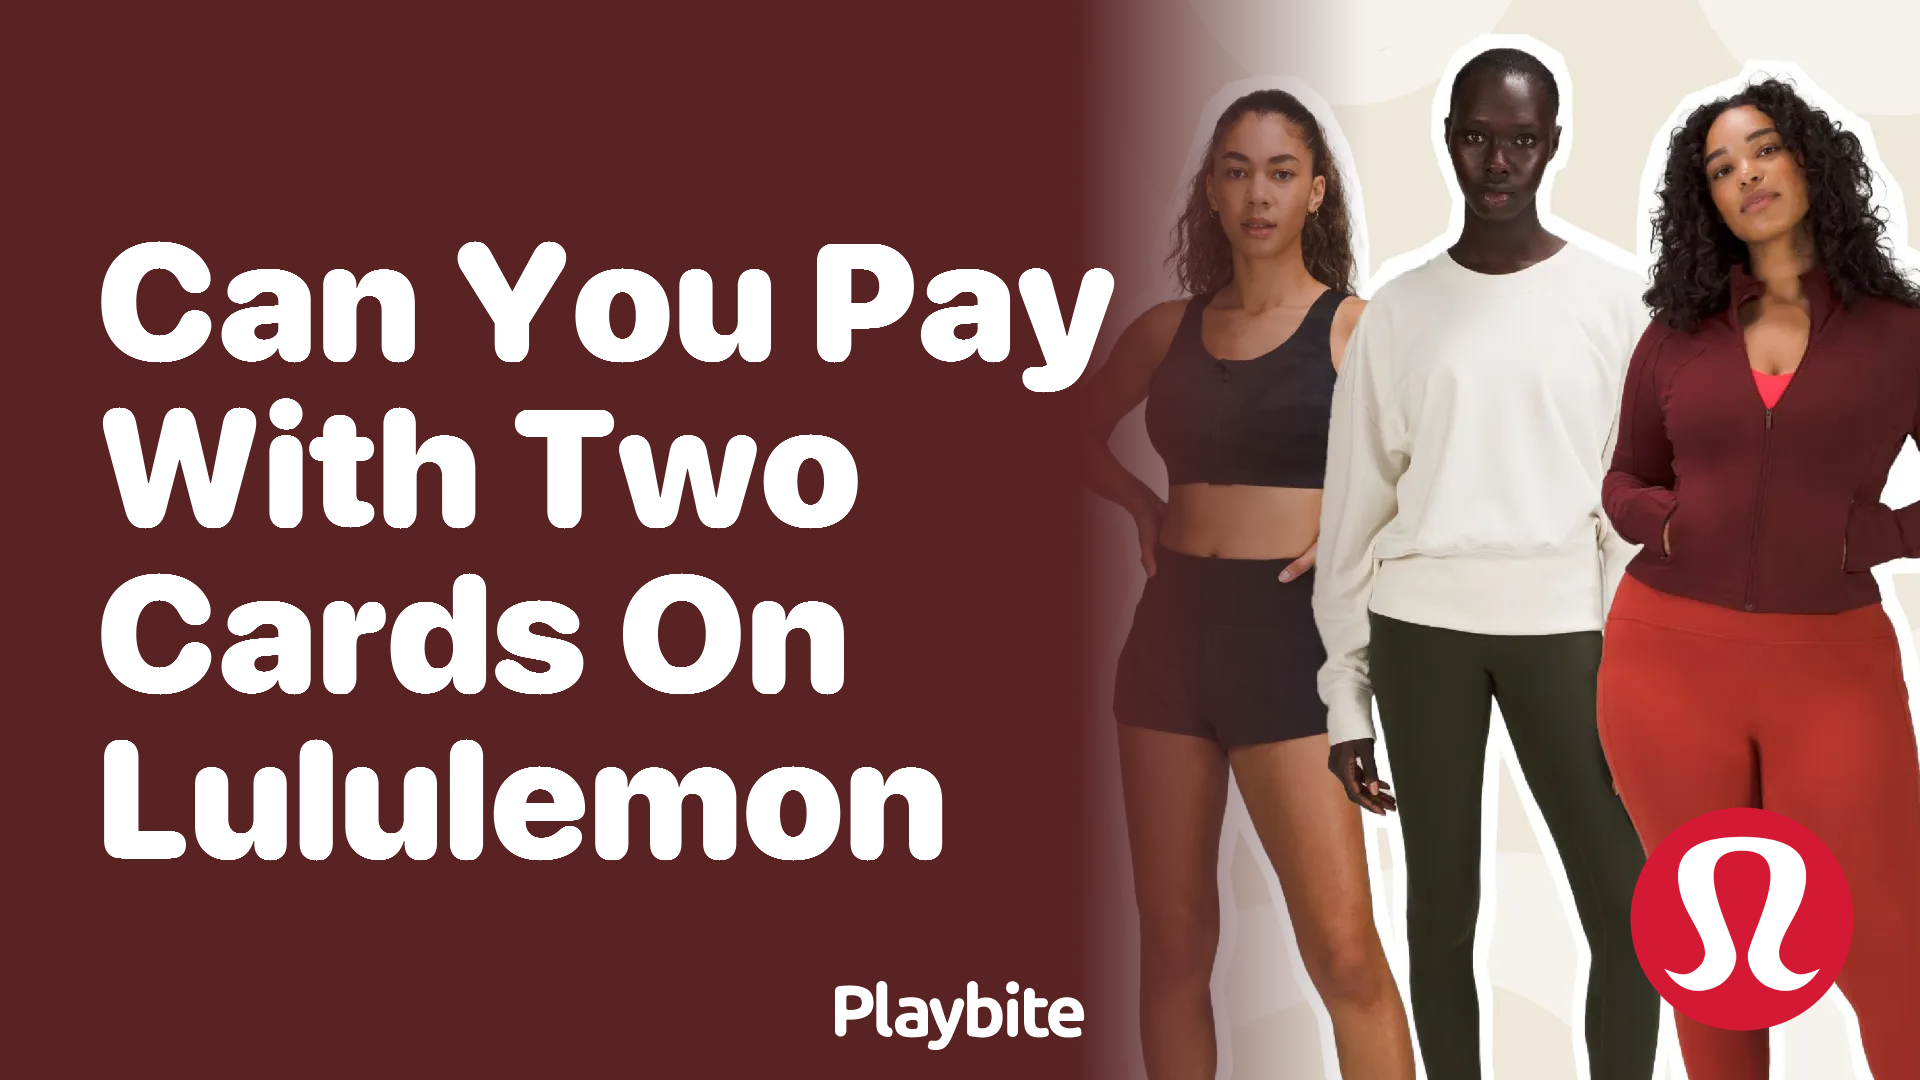 What Is the Most Expensive Lululemon Item? - Playbite